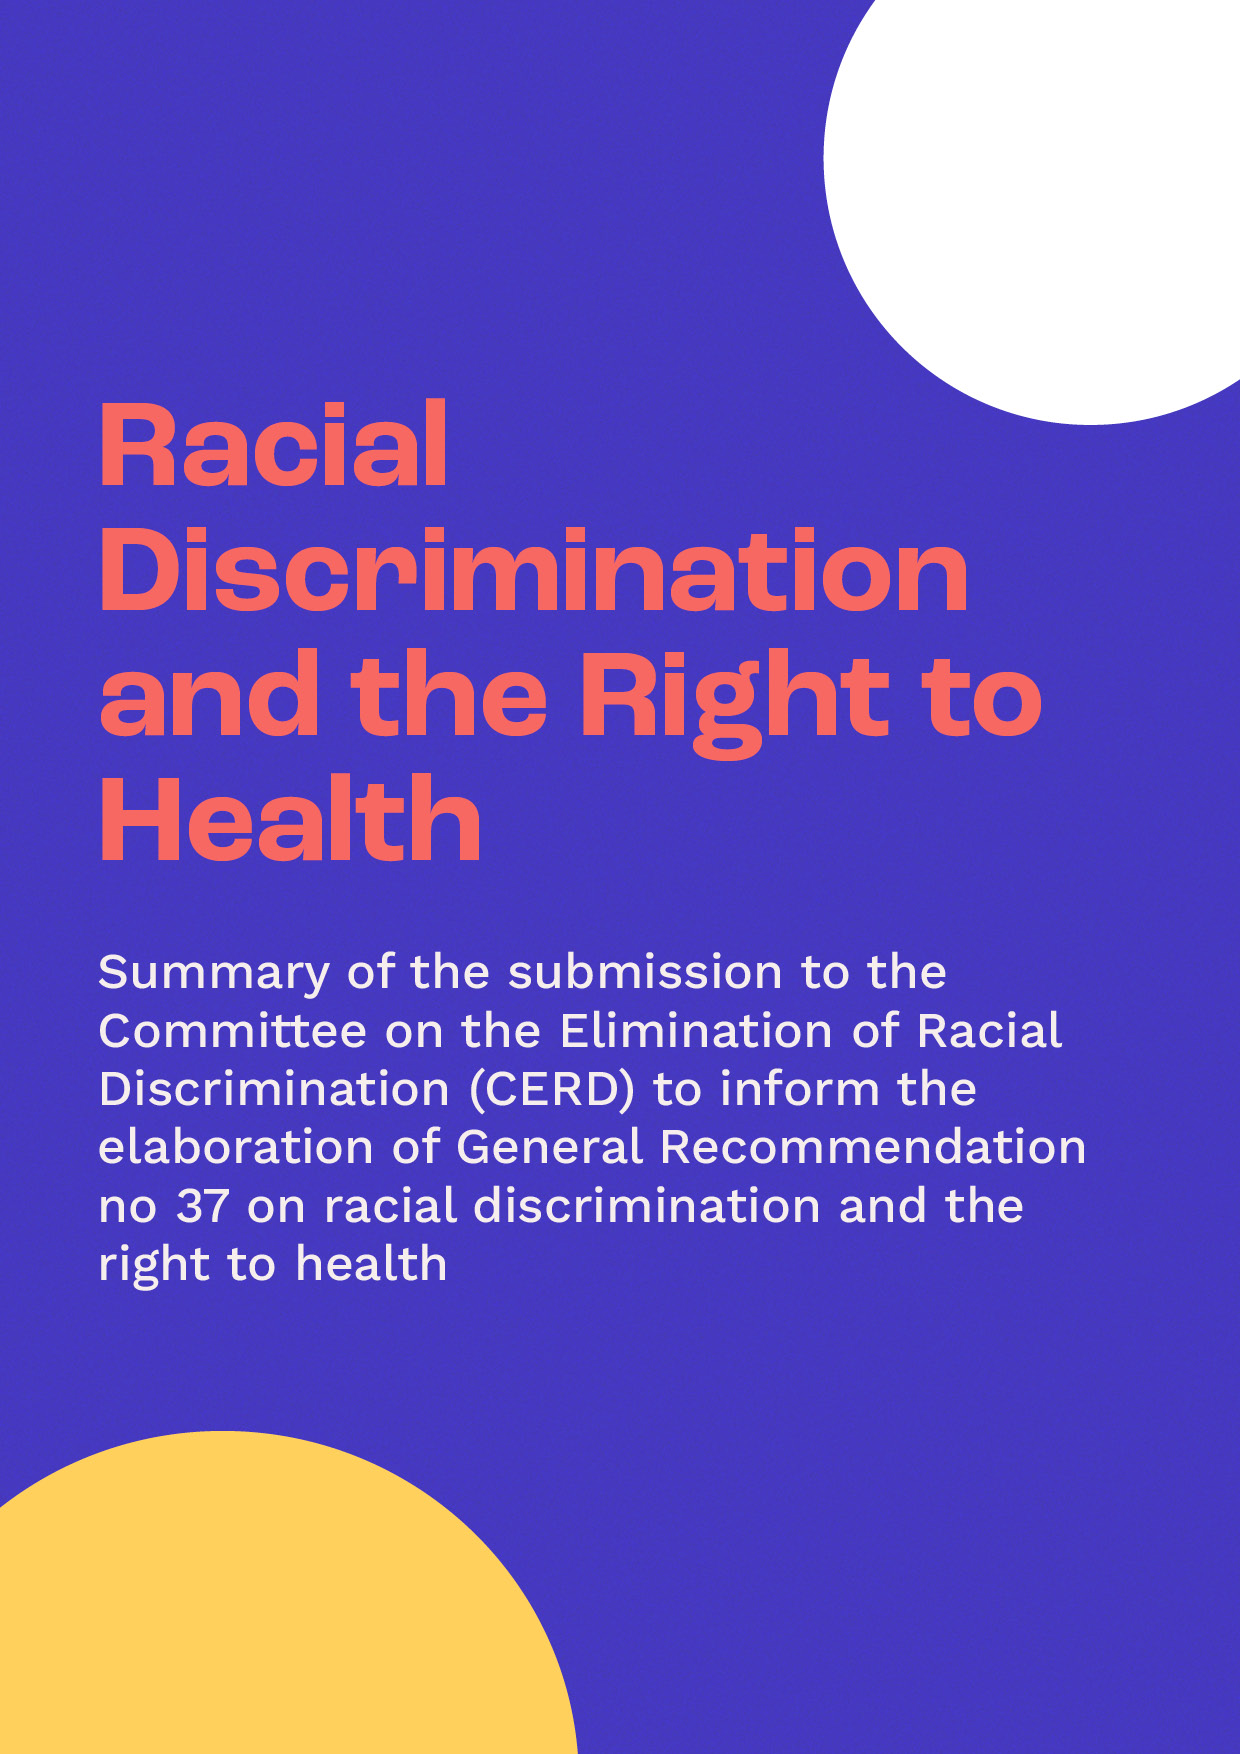 Cover of the summary TEXT: Racial Discrimination and the Right to Health   Summary of the submission to the Committee on the Elimination of Racial Discrimination (CERD) to inform the elaboration of General Recommendation no 37 on racial discrimination and the right to health